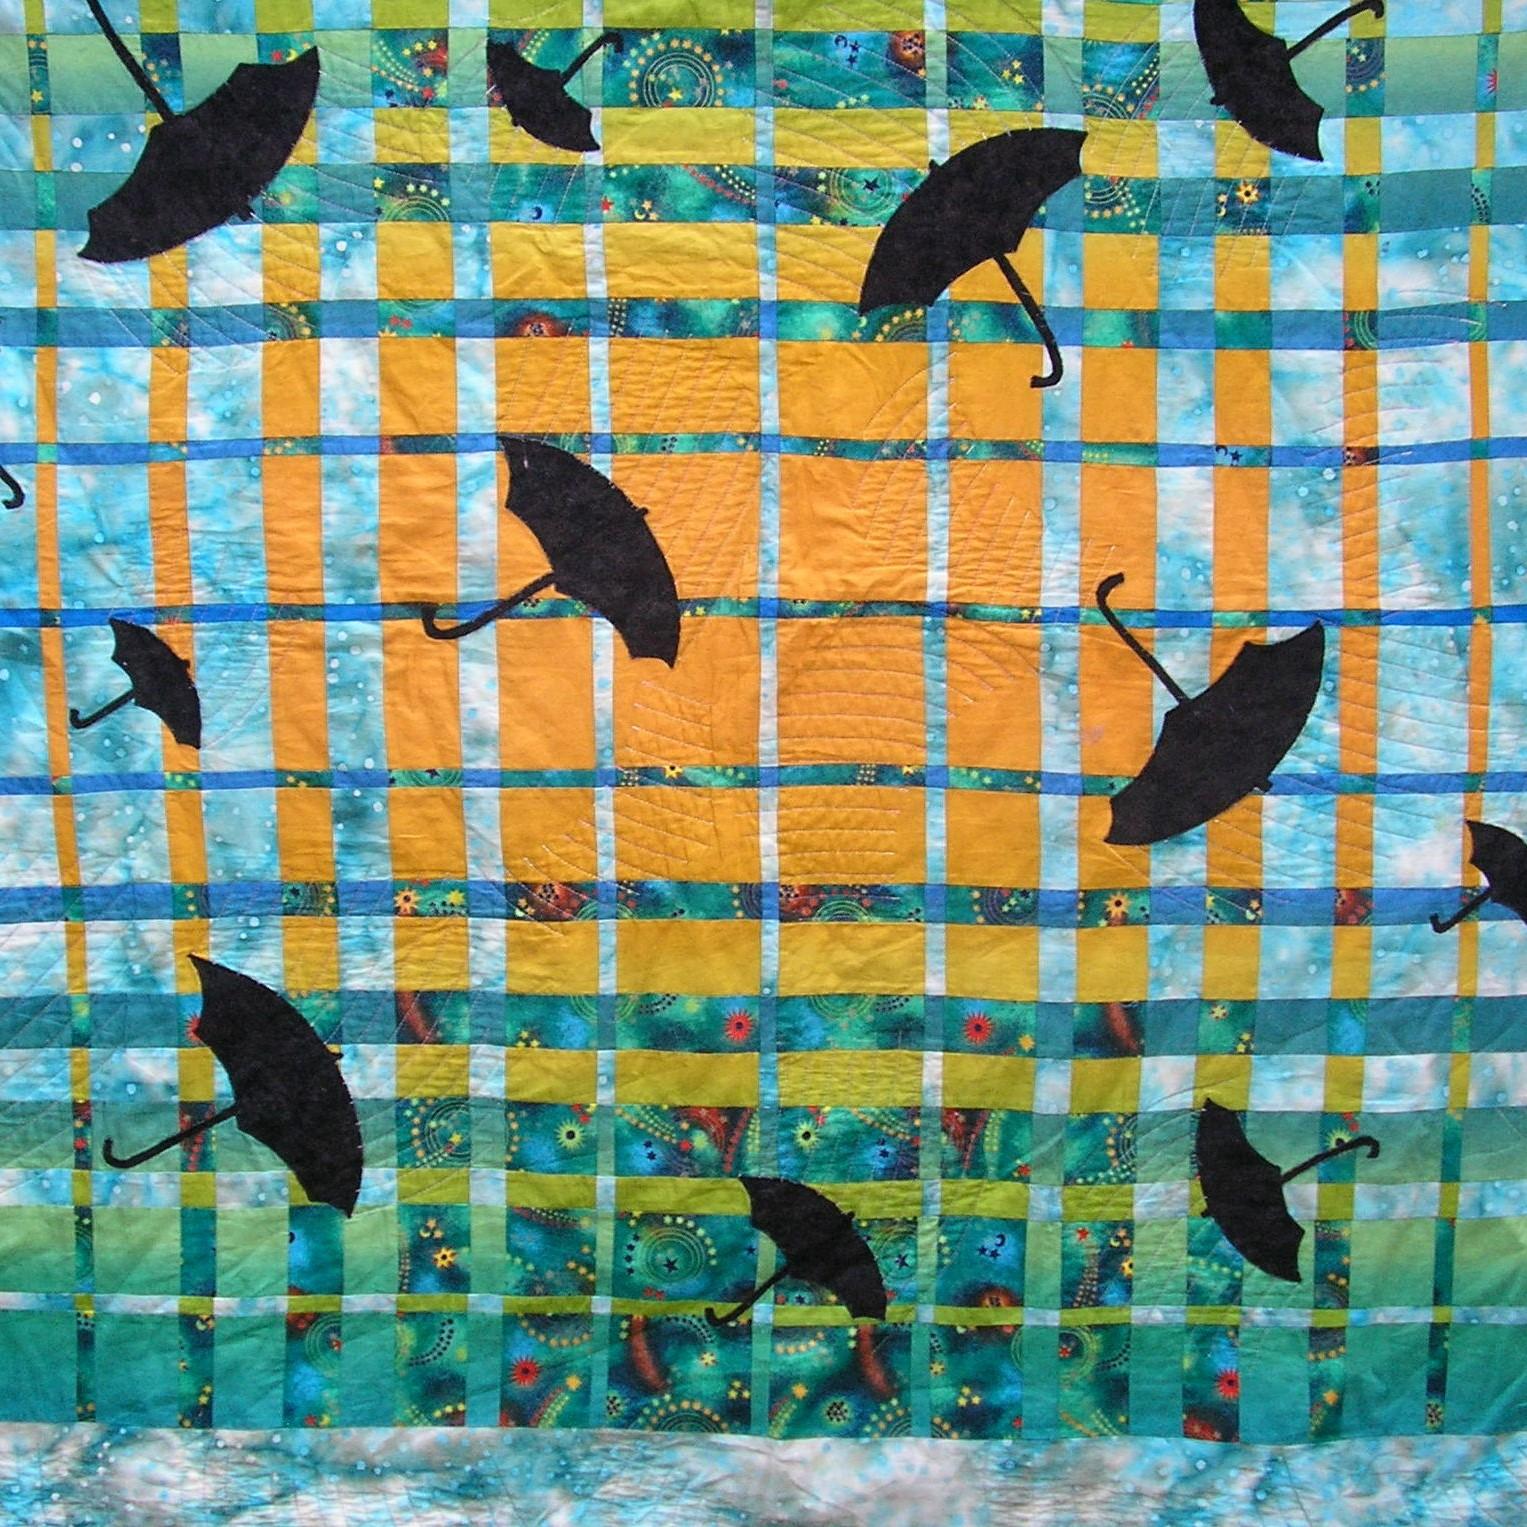 quilt in green, blue and orange squares and rectangles with black umbrella applique in difference sizes.